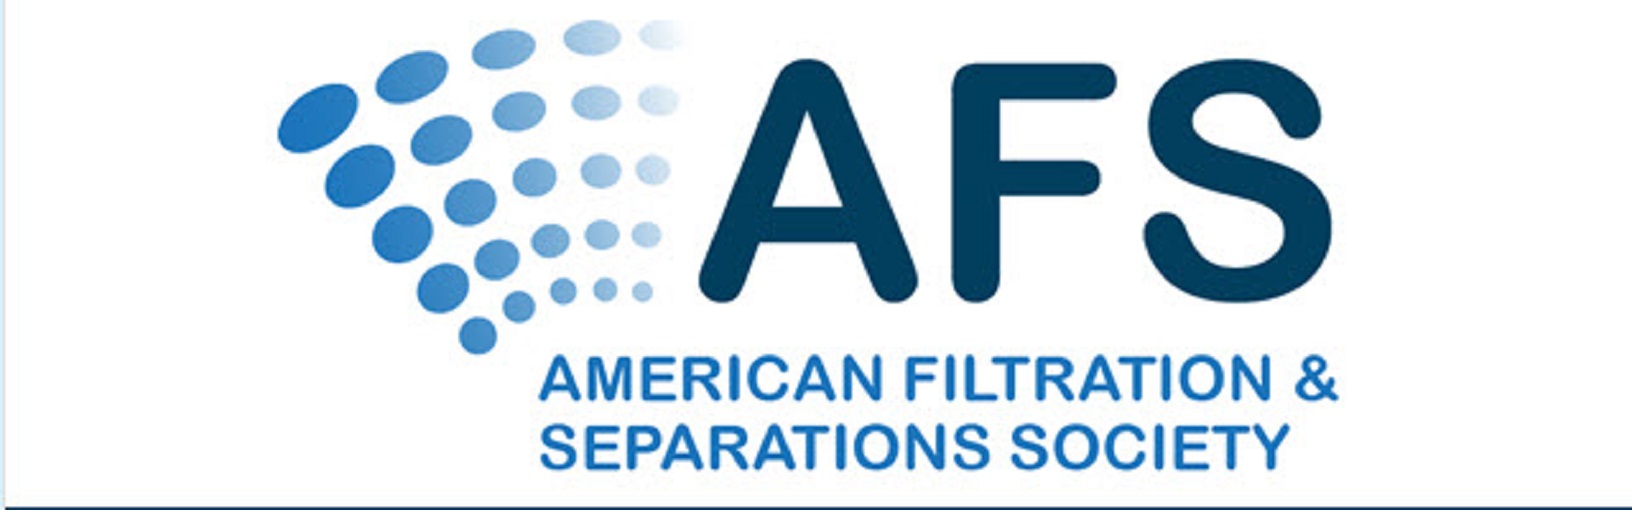 Molecular separators for promoting process separations in industrial applications will be discussed at the forthcoming AFS Southwest virtual meeting.